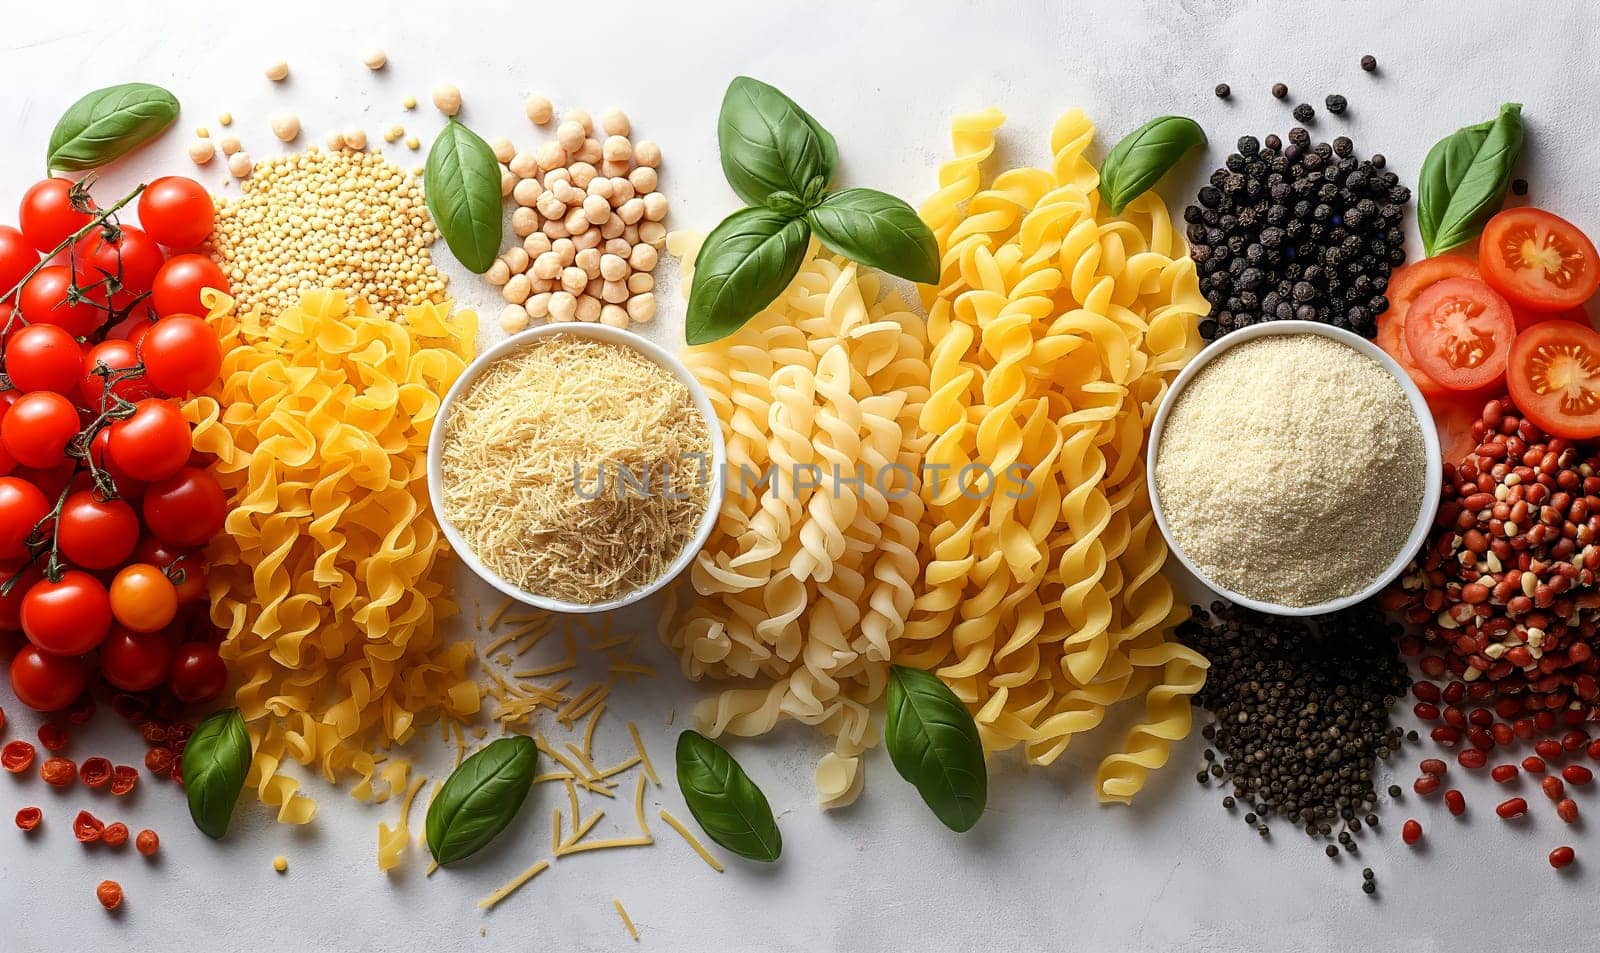 Food background with spaghetti or pasta recipe ingredient on wooden table.